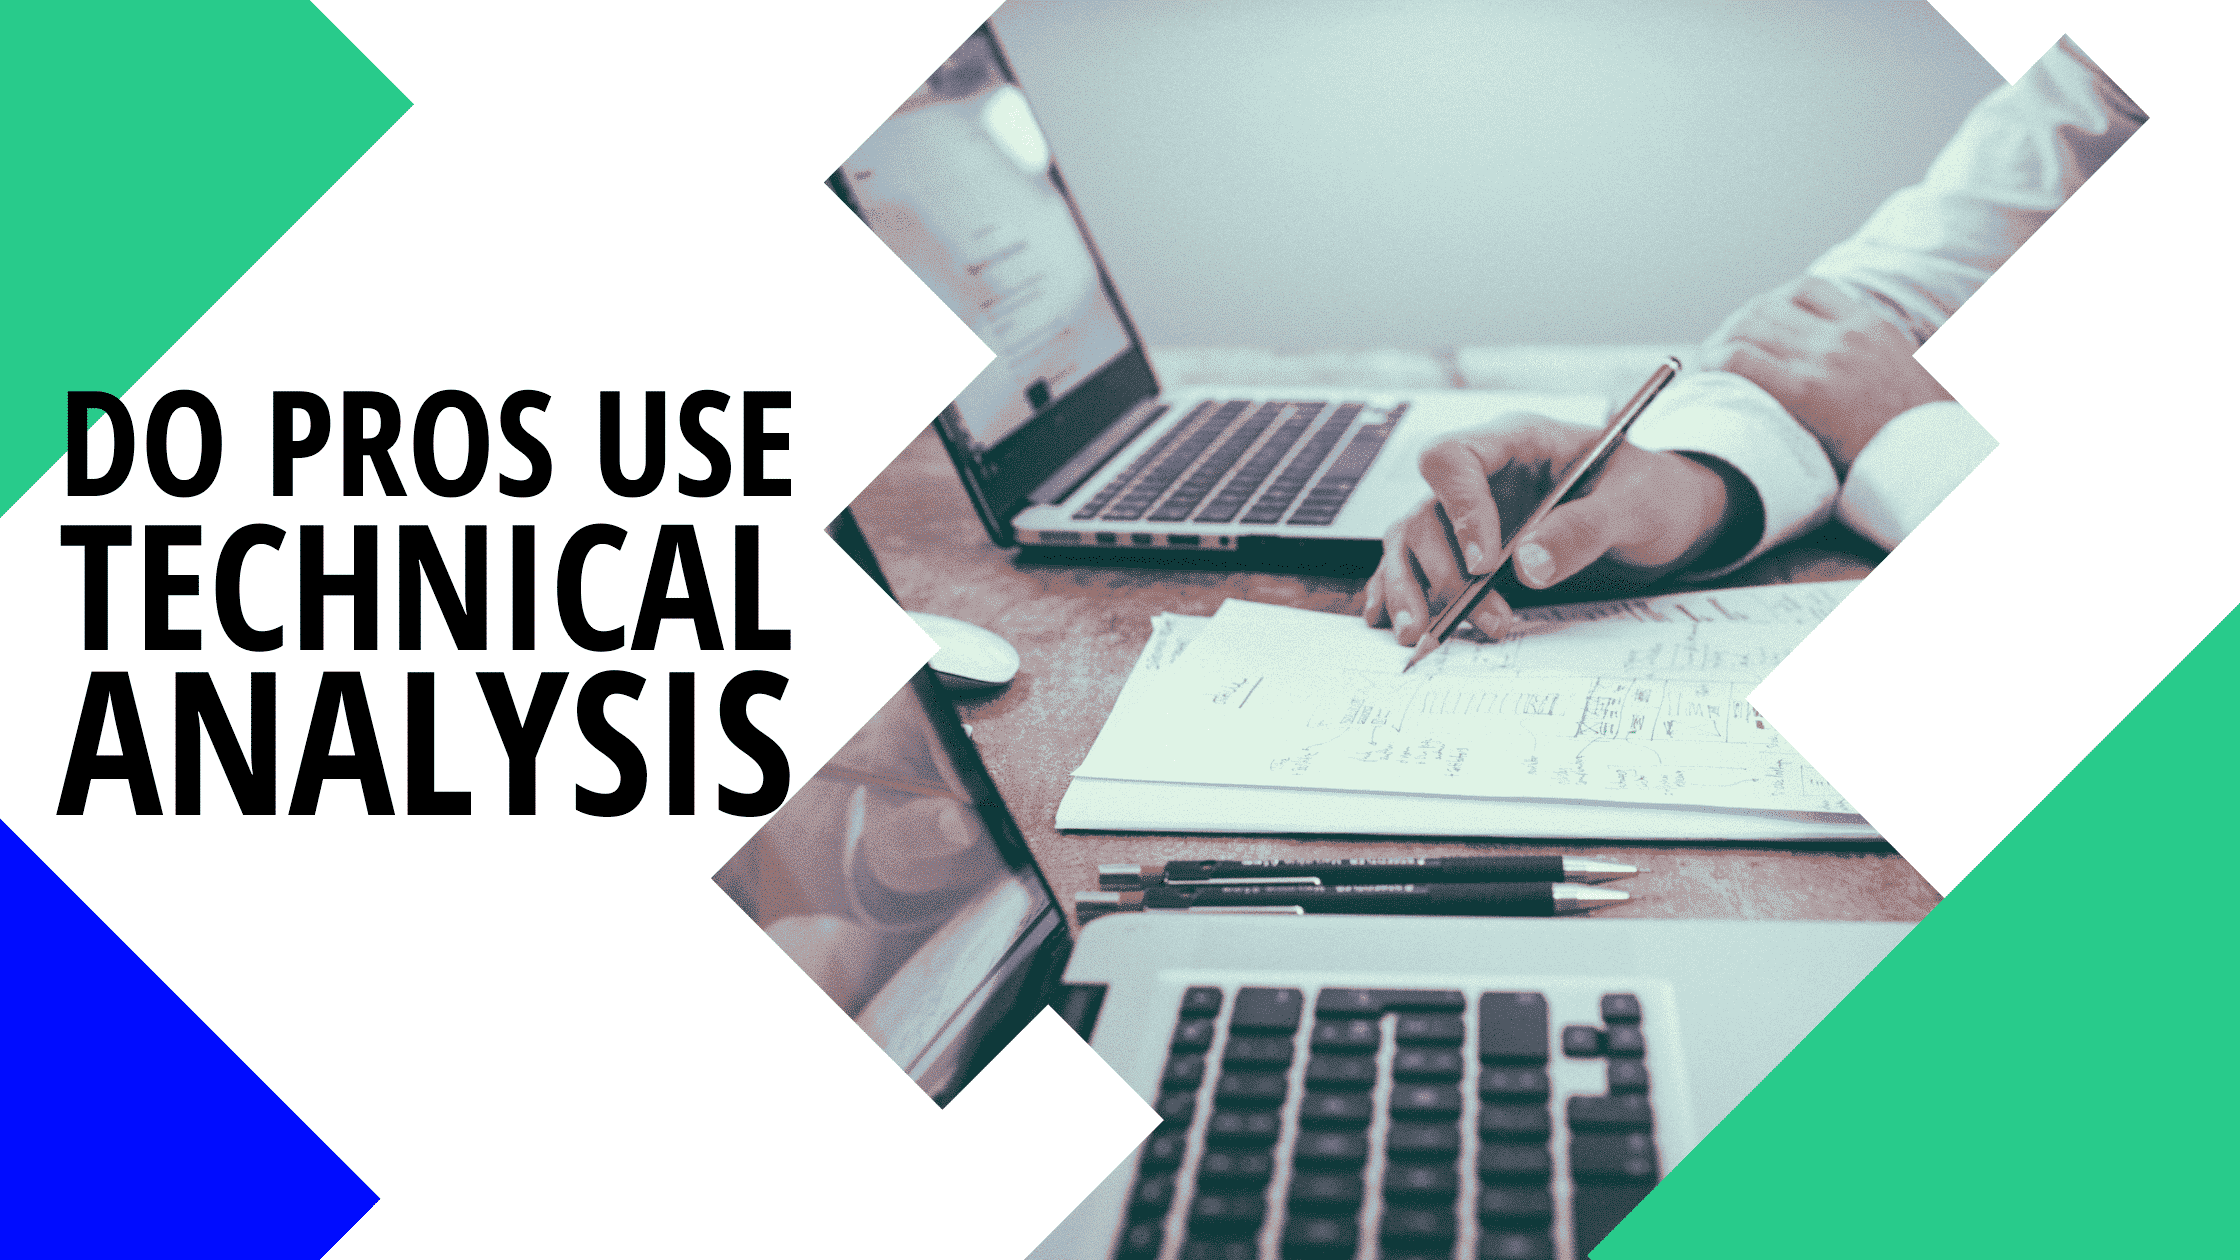 Do professional traders use technical analysis?